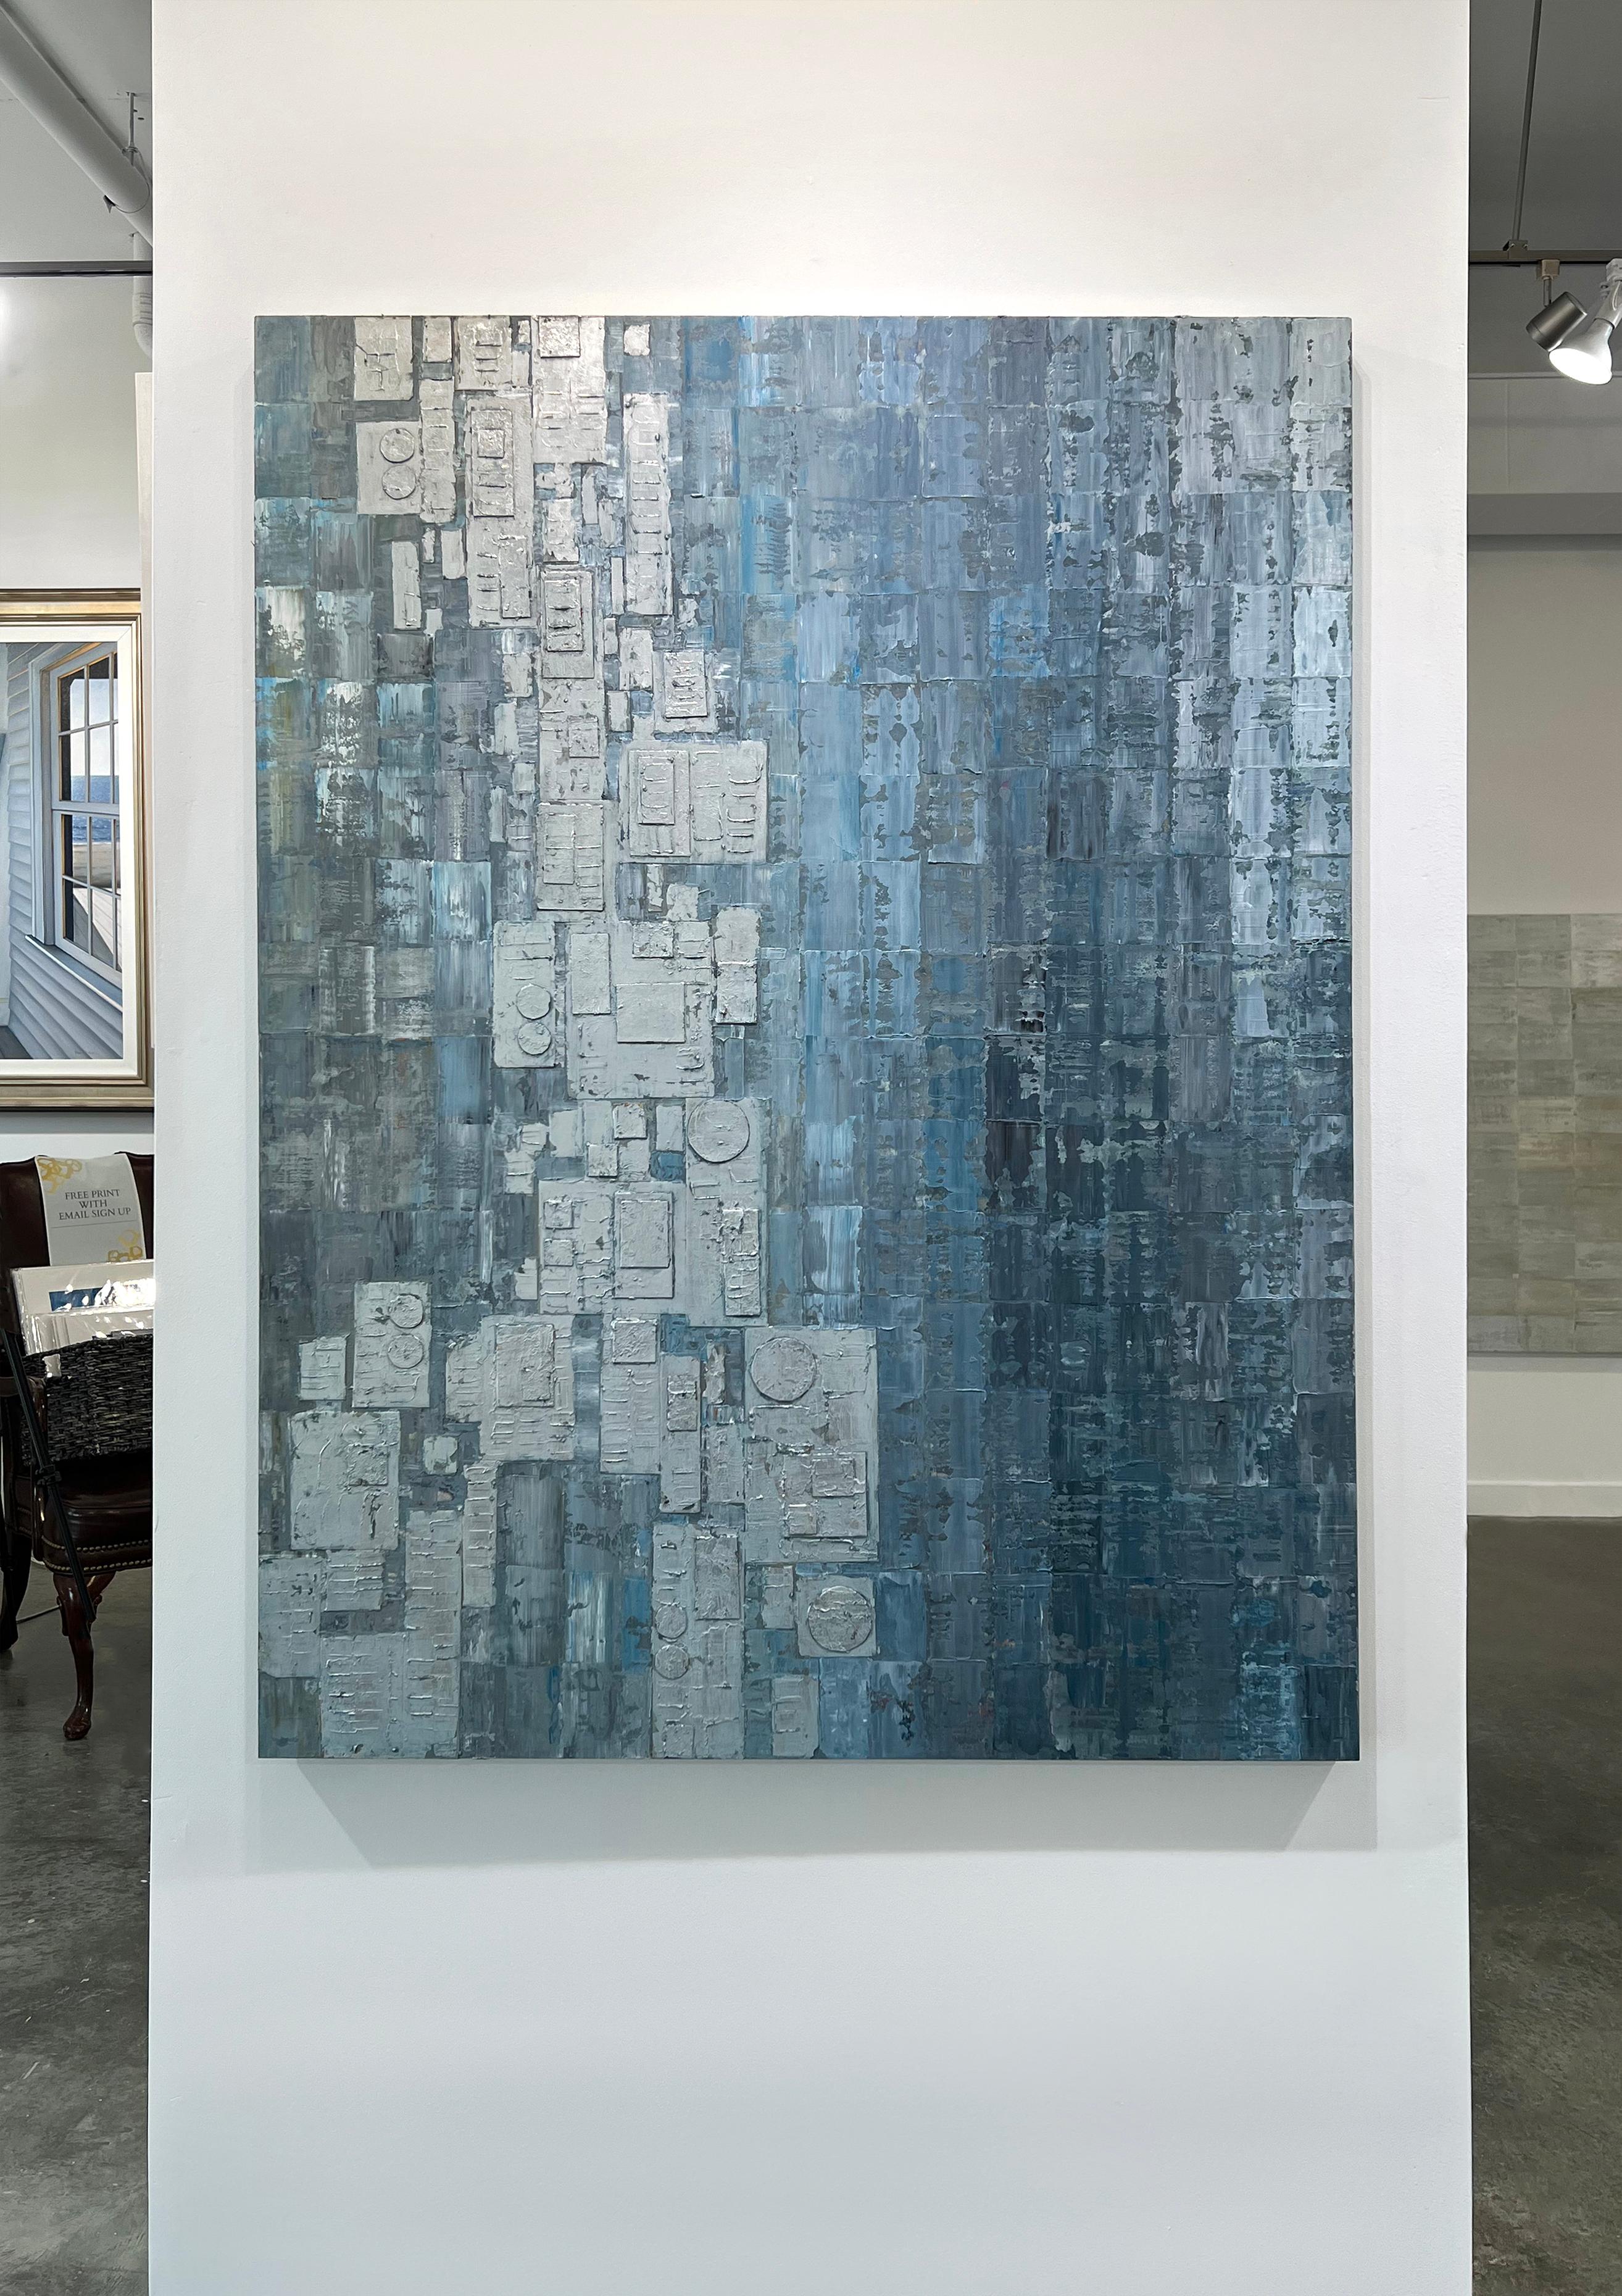 This abstract, contemporary painting by Ned Martin features a blue and silver palette. Varying shades of blue rectangular shapes are patterned together in a loose grid formation, with silver textured rectangles and and circles overlapping as they